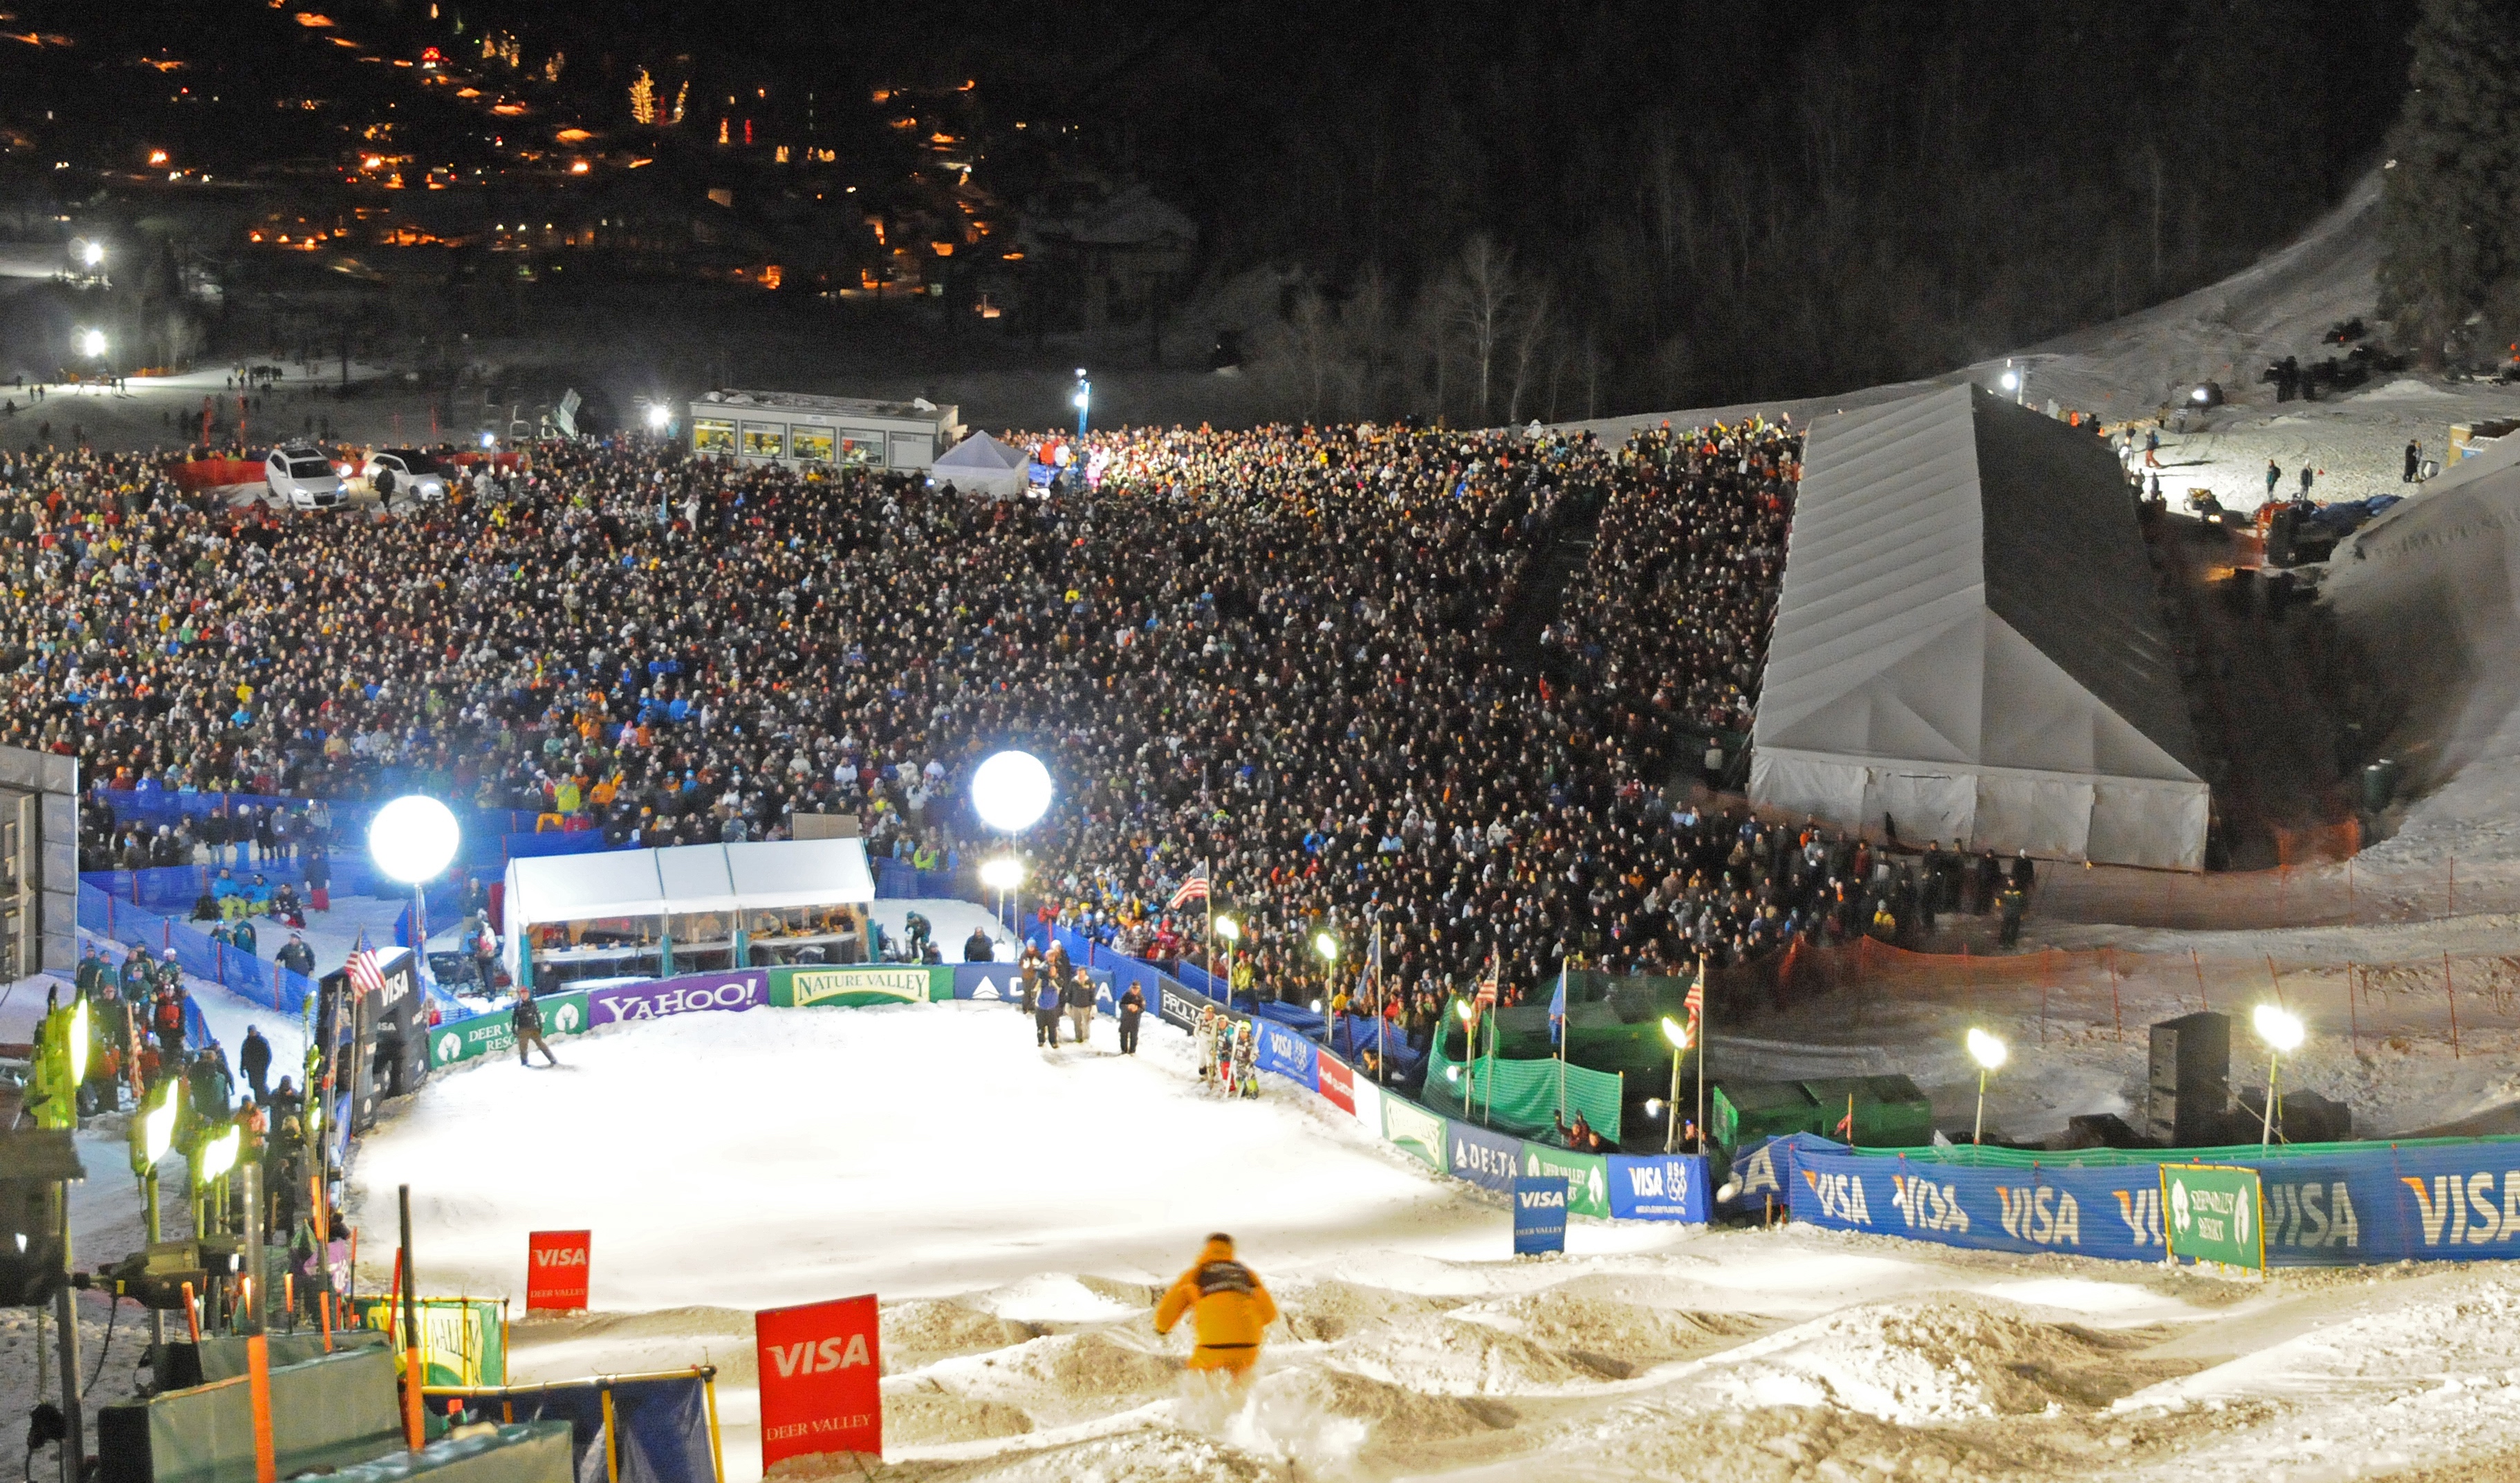 A massive crowd packed into Deer Valley Resort in 2010.